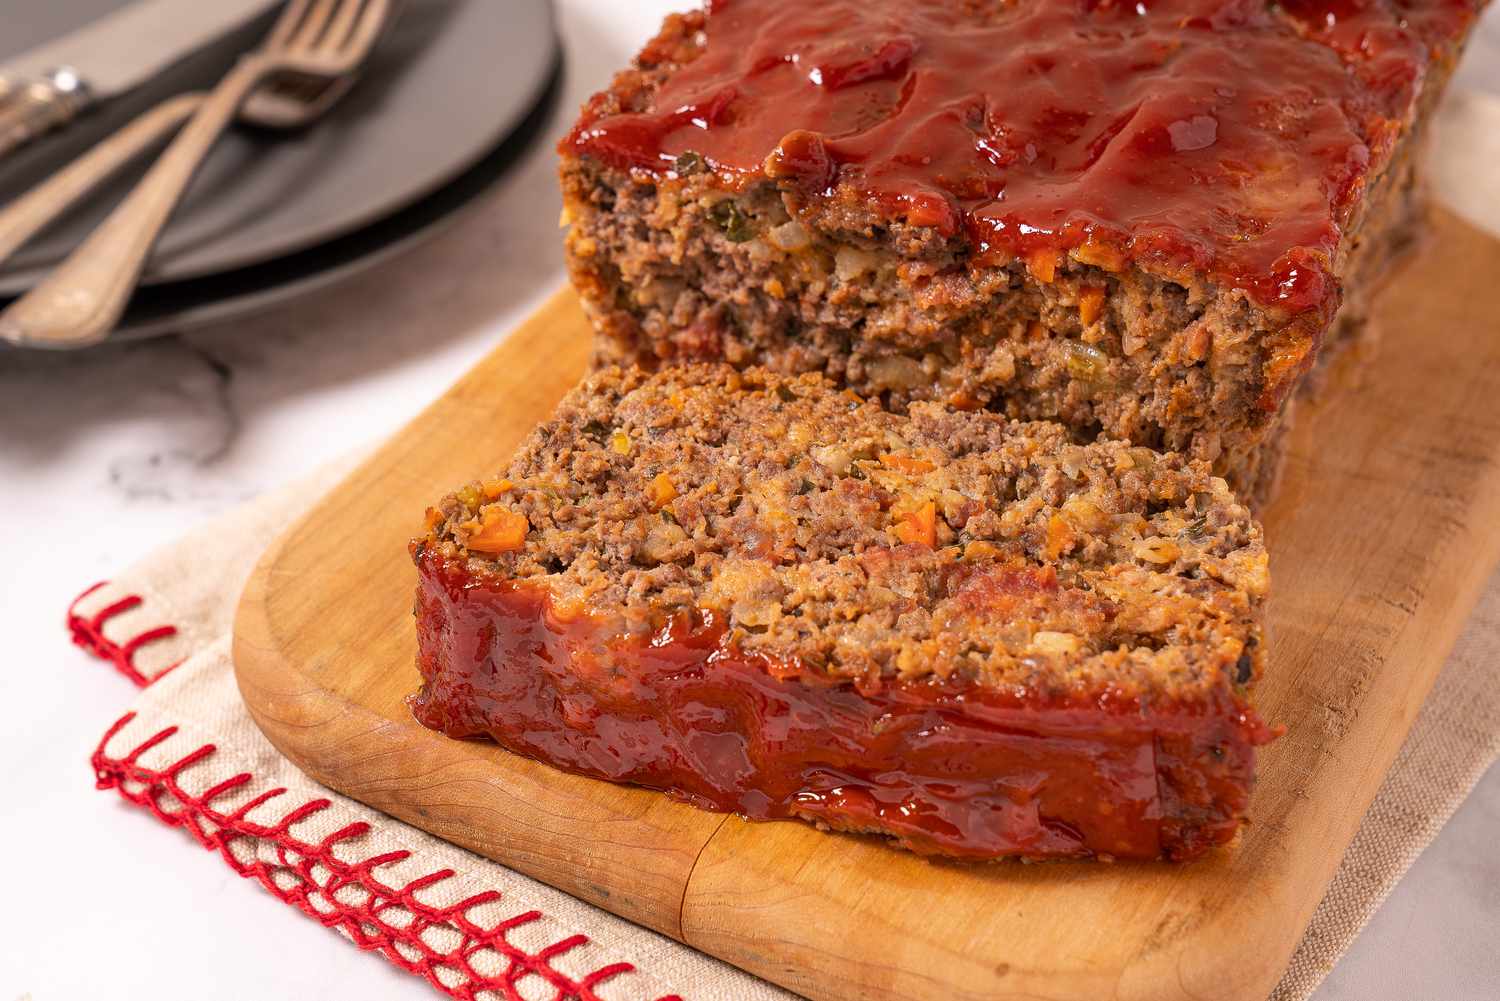 Sliced meatloaf with shiny ketchup glaze on a wooden board